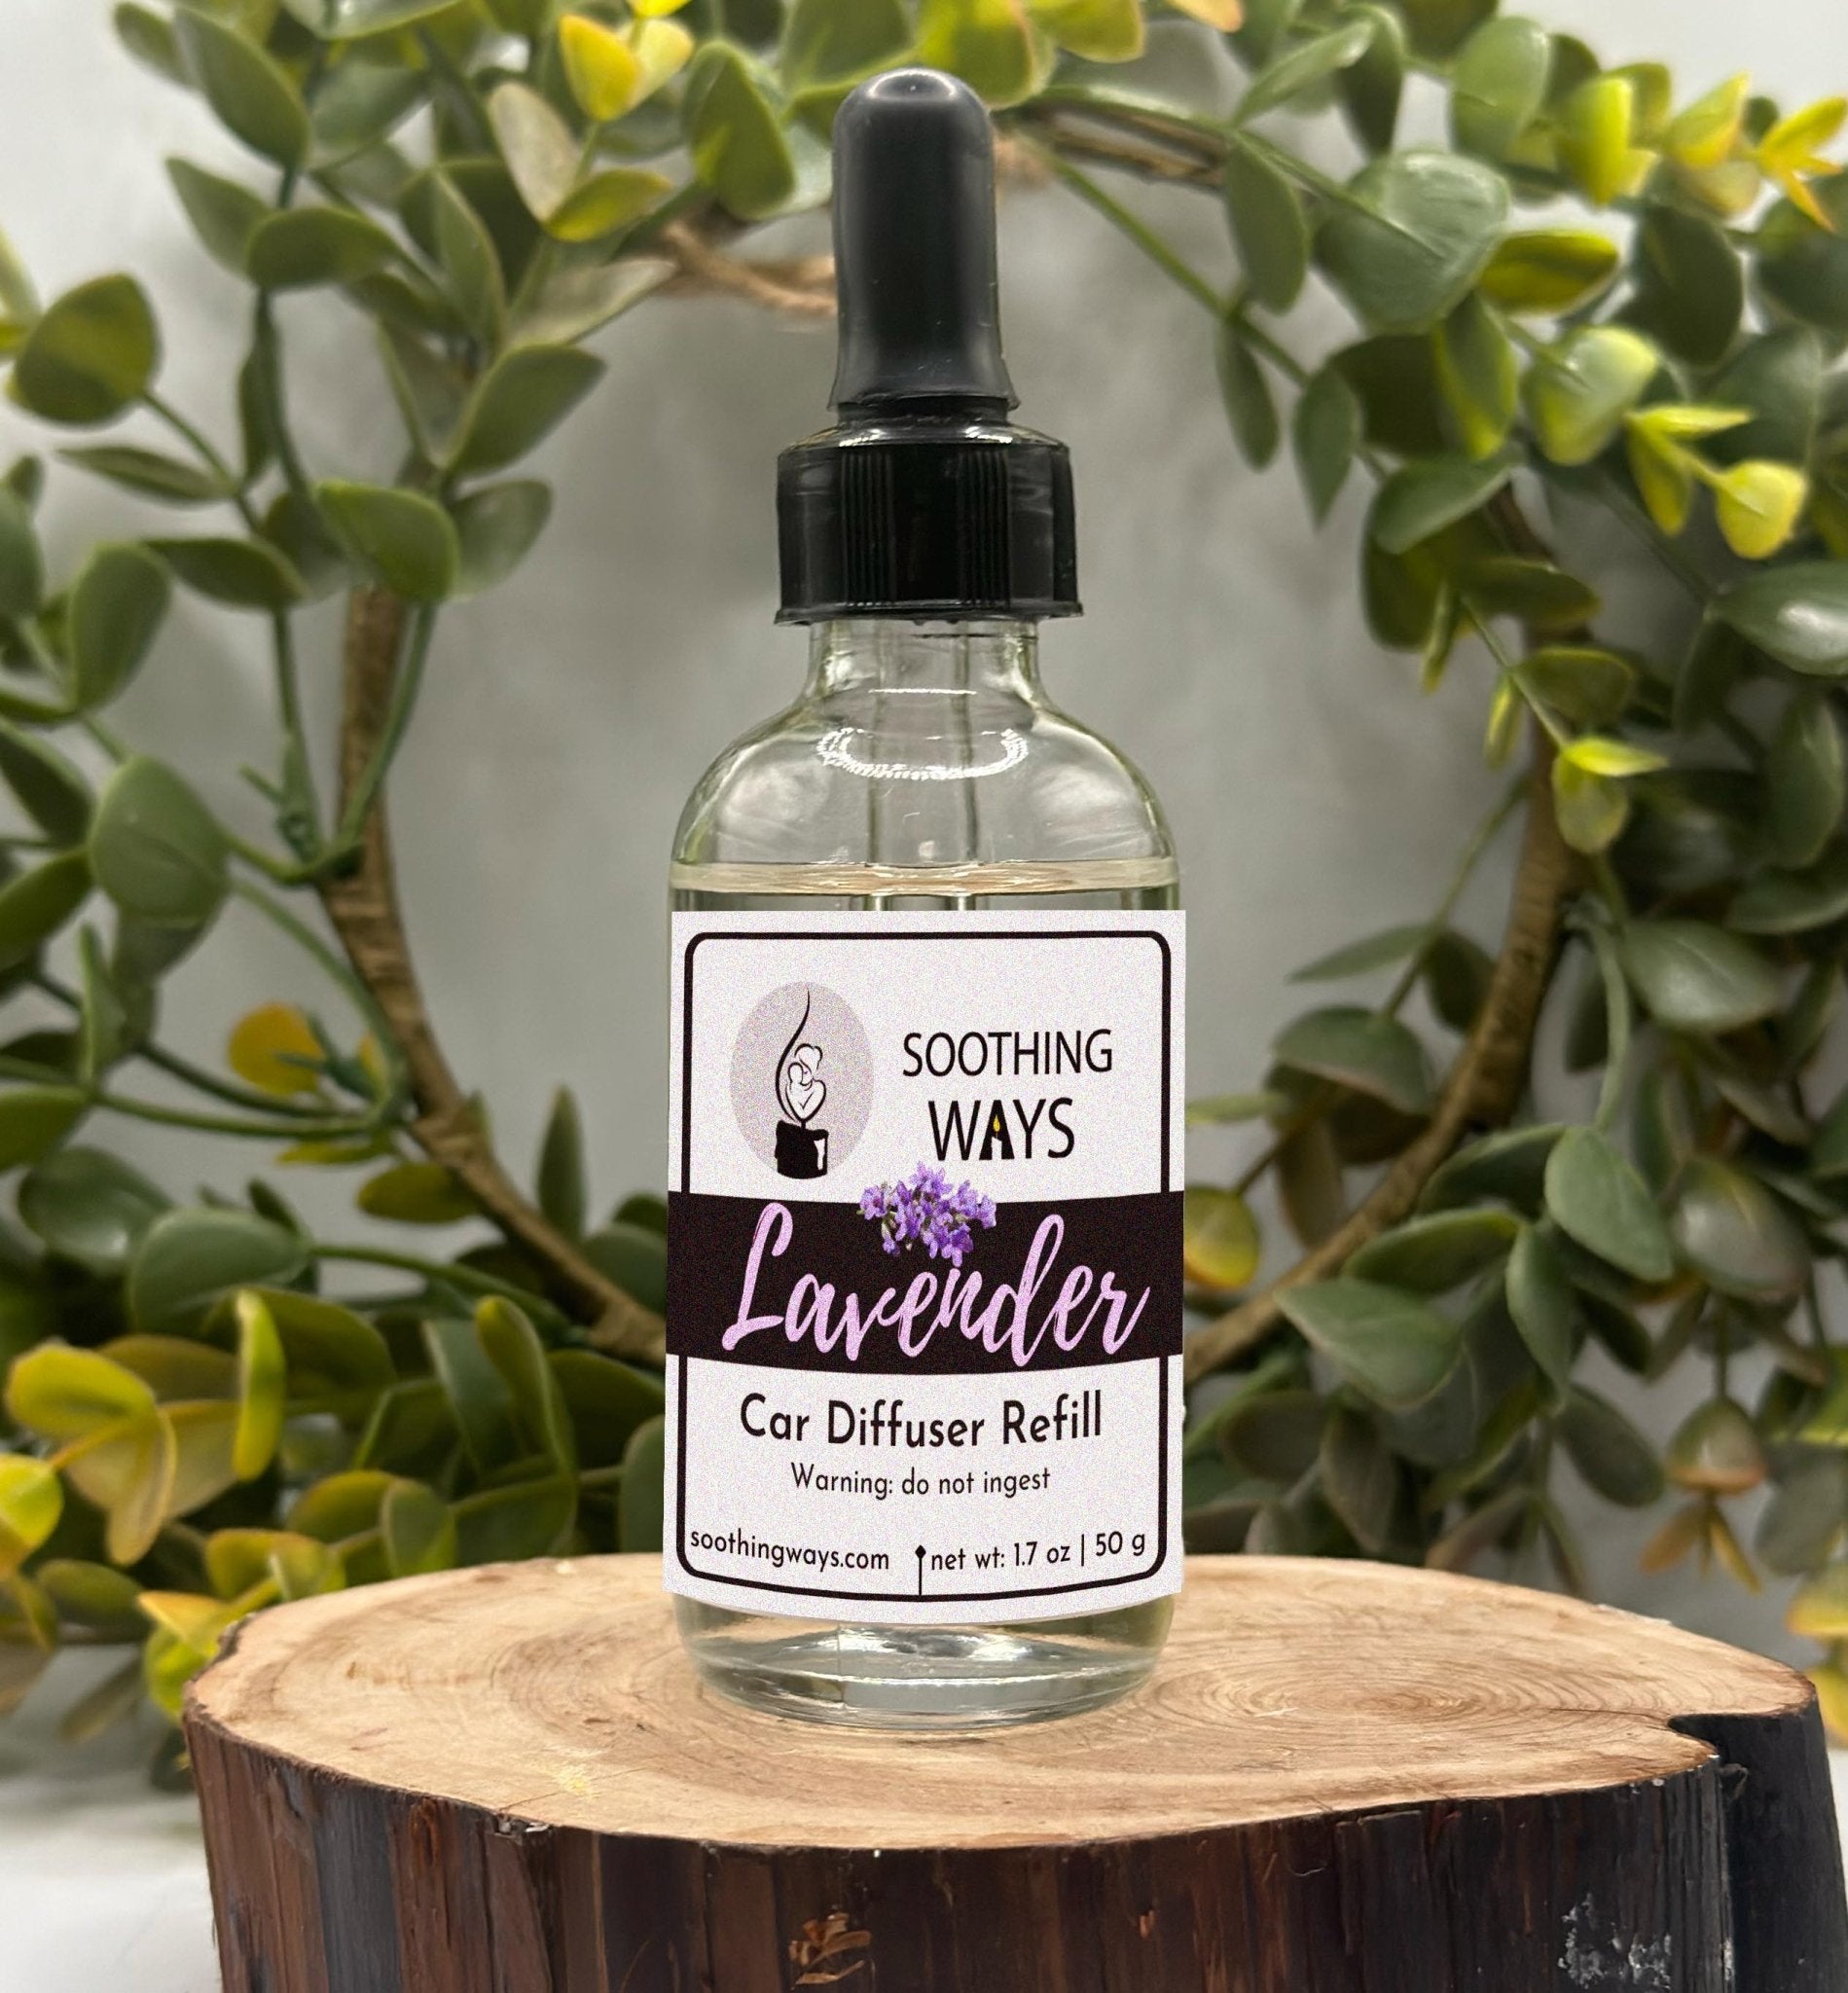 Lavender - Car Diffuser Fragrance Refill - Soothing Ways